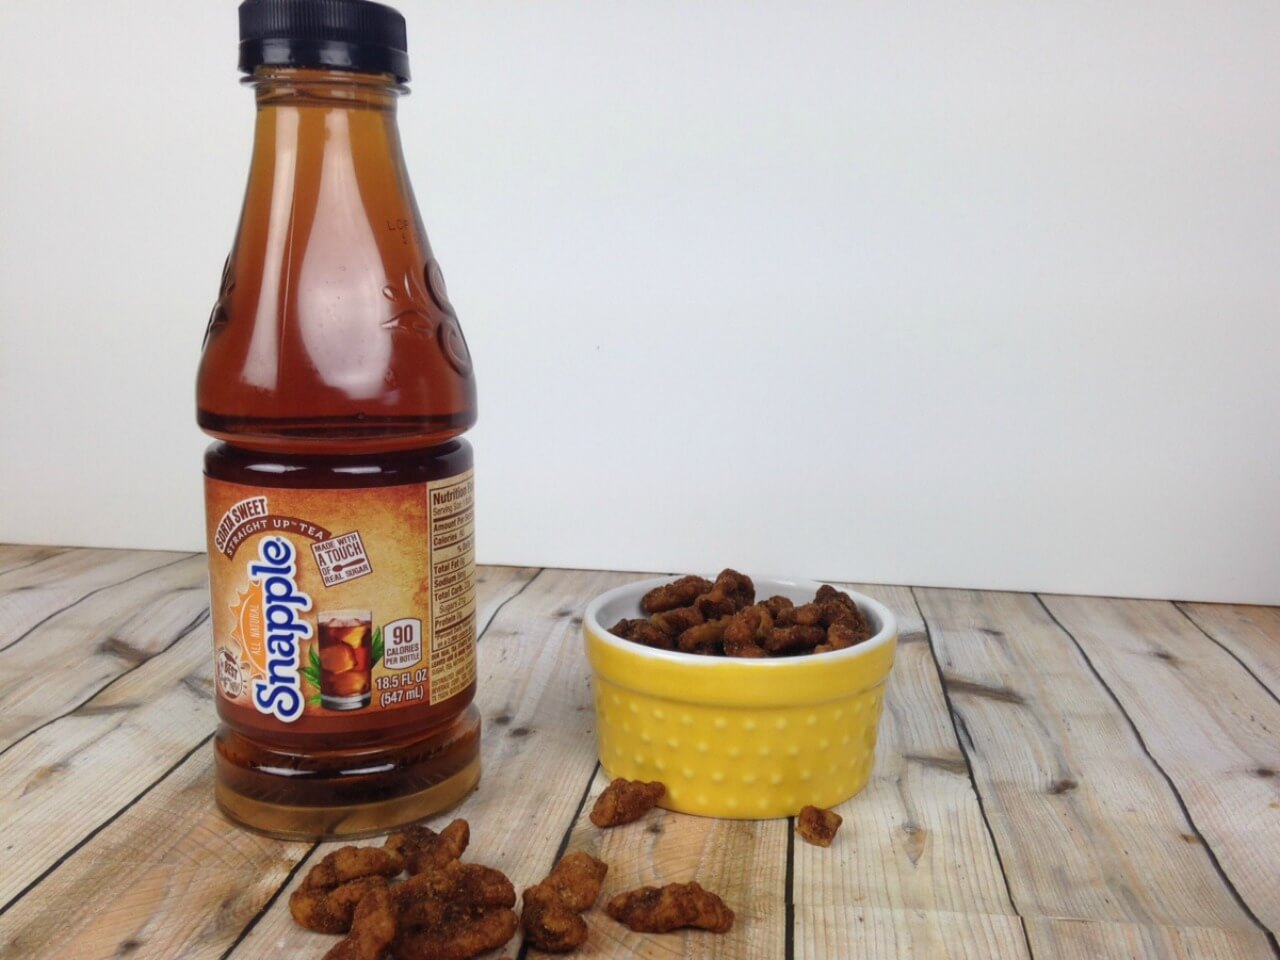 Pumpkin Pie Spiced Walnuts in a small yellow bowl next to a bottle of Snapple Sorta Sweet Tea